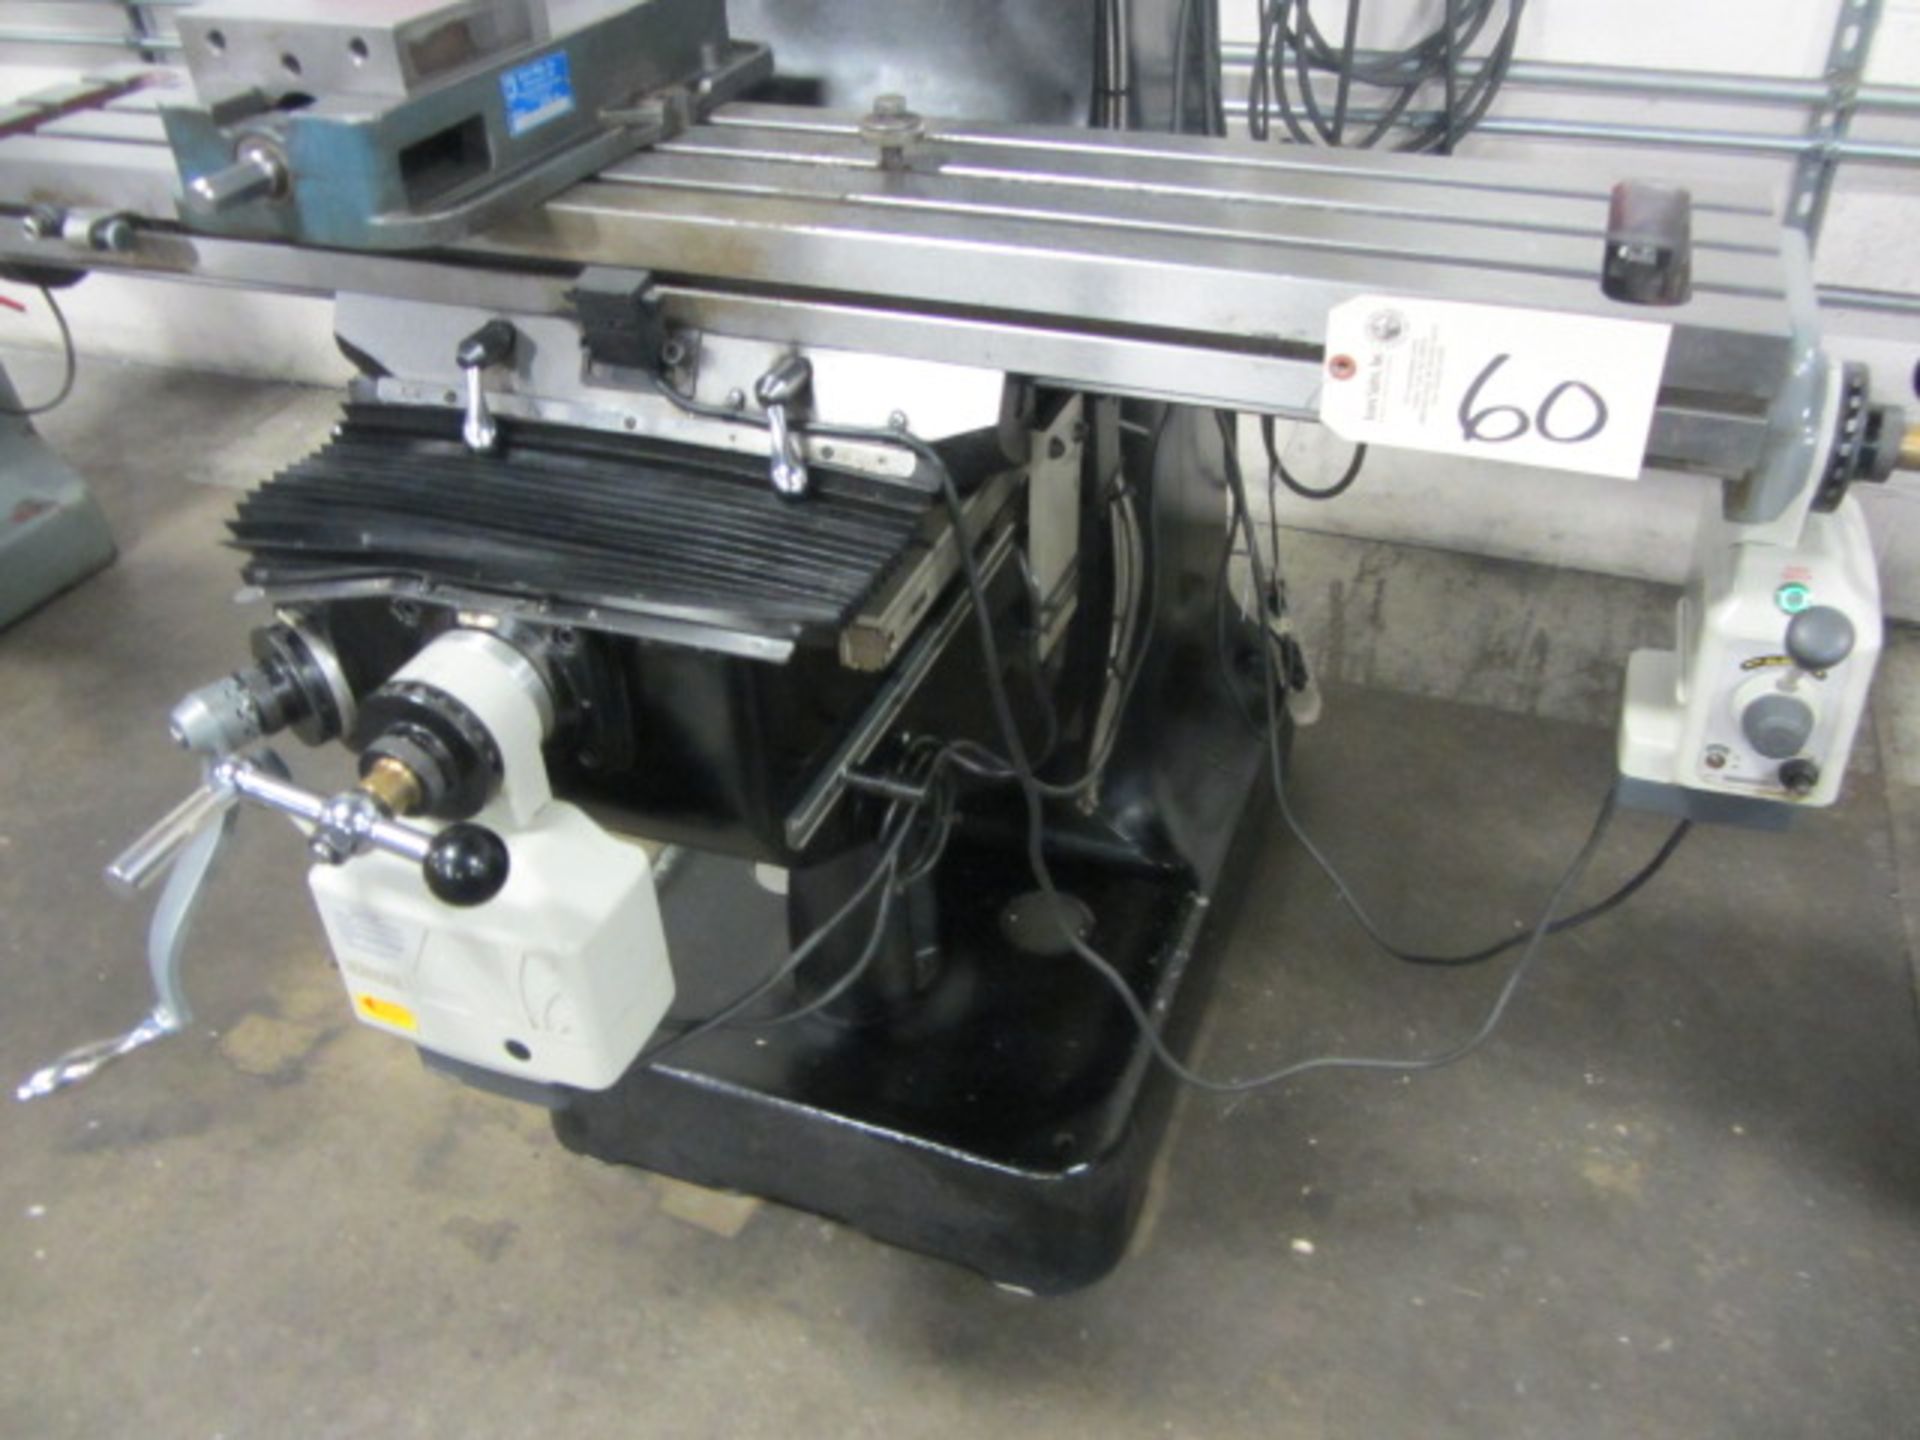 Vectrax Vari-Speed Vertical Milling Machine with 9'' x 48'' Power Feed Table, Longitudinal Power - Image 2 of 7